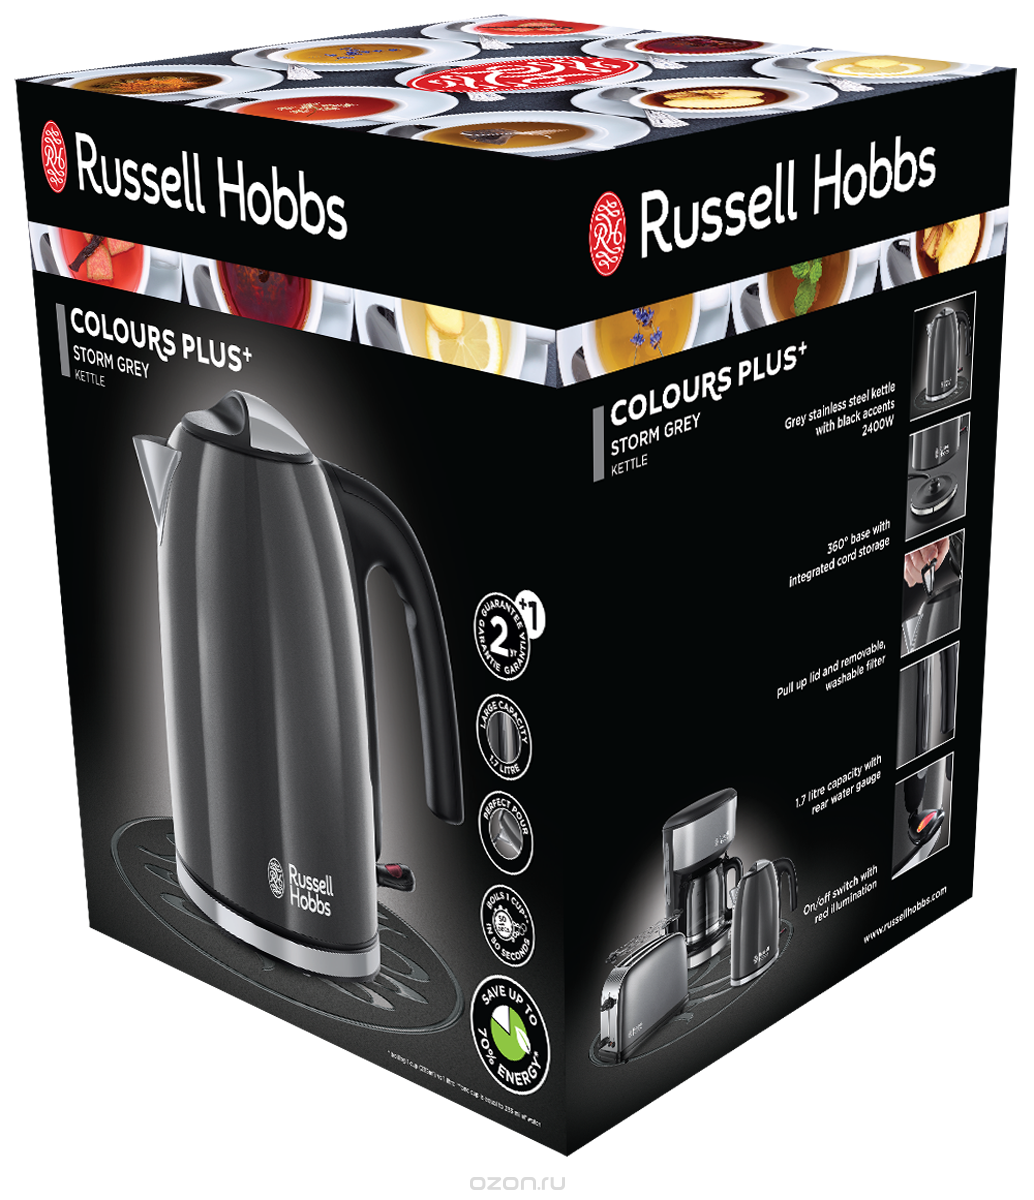   Russell Hobbs Colours Plus, 20414-70